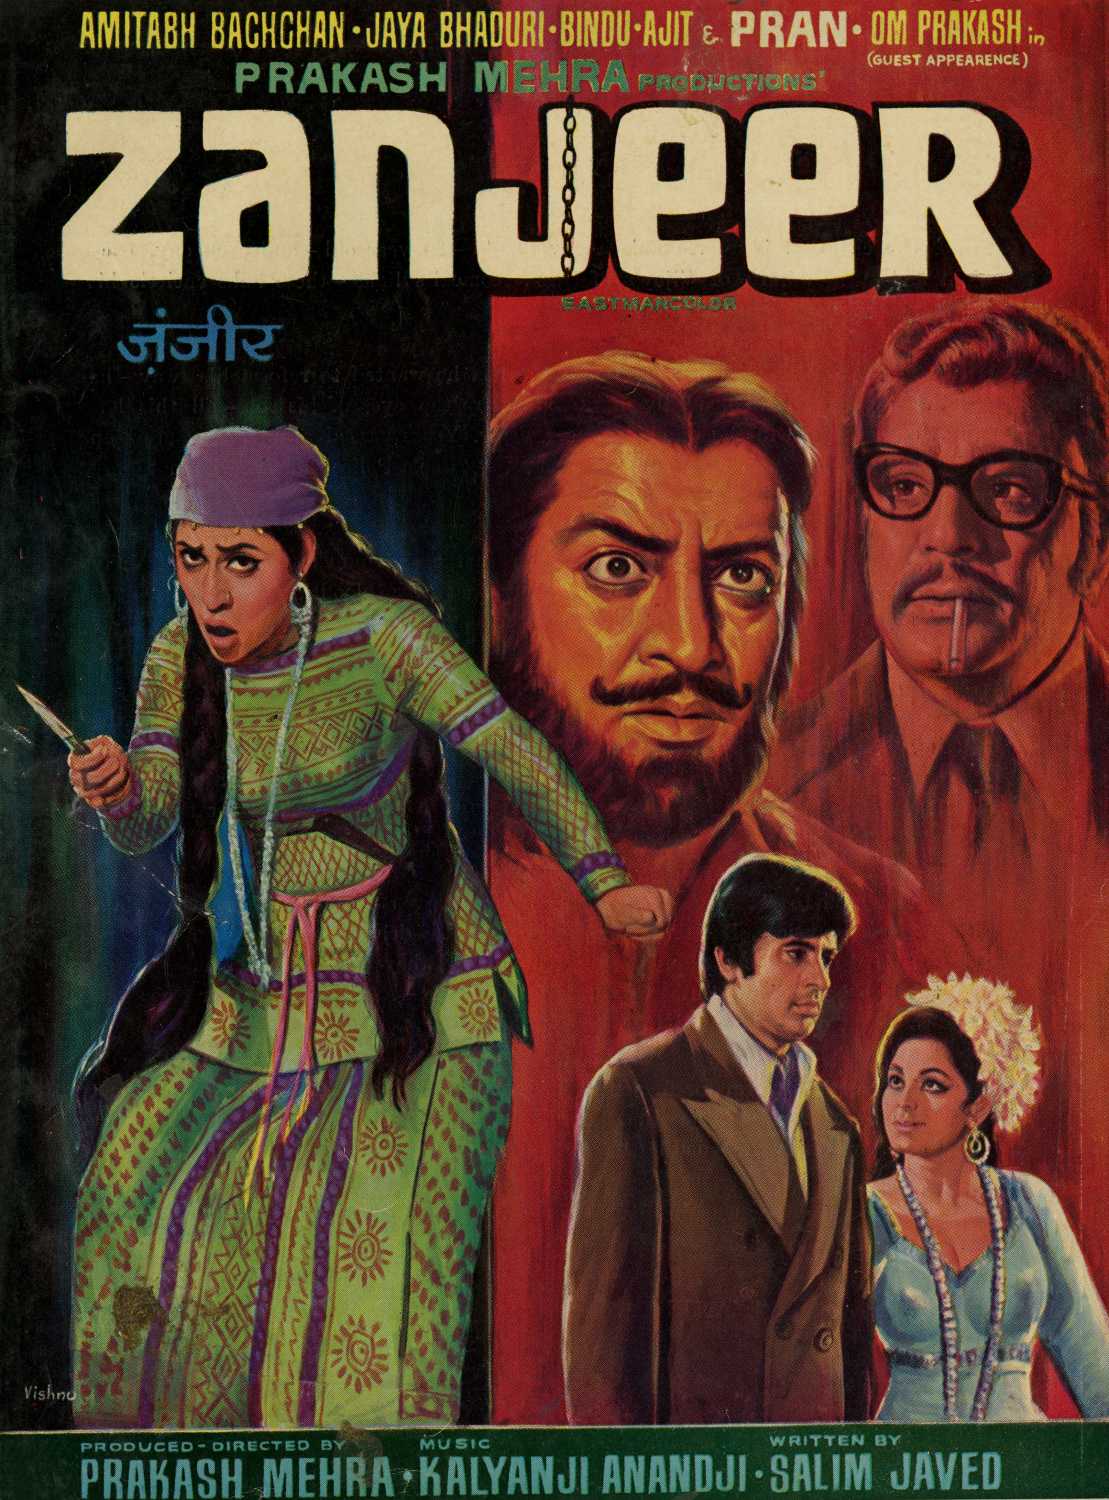 Zanjeer is one of the best Bollywood action movies